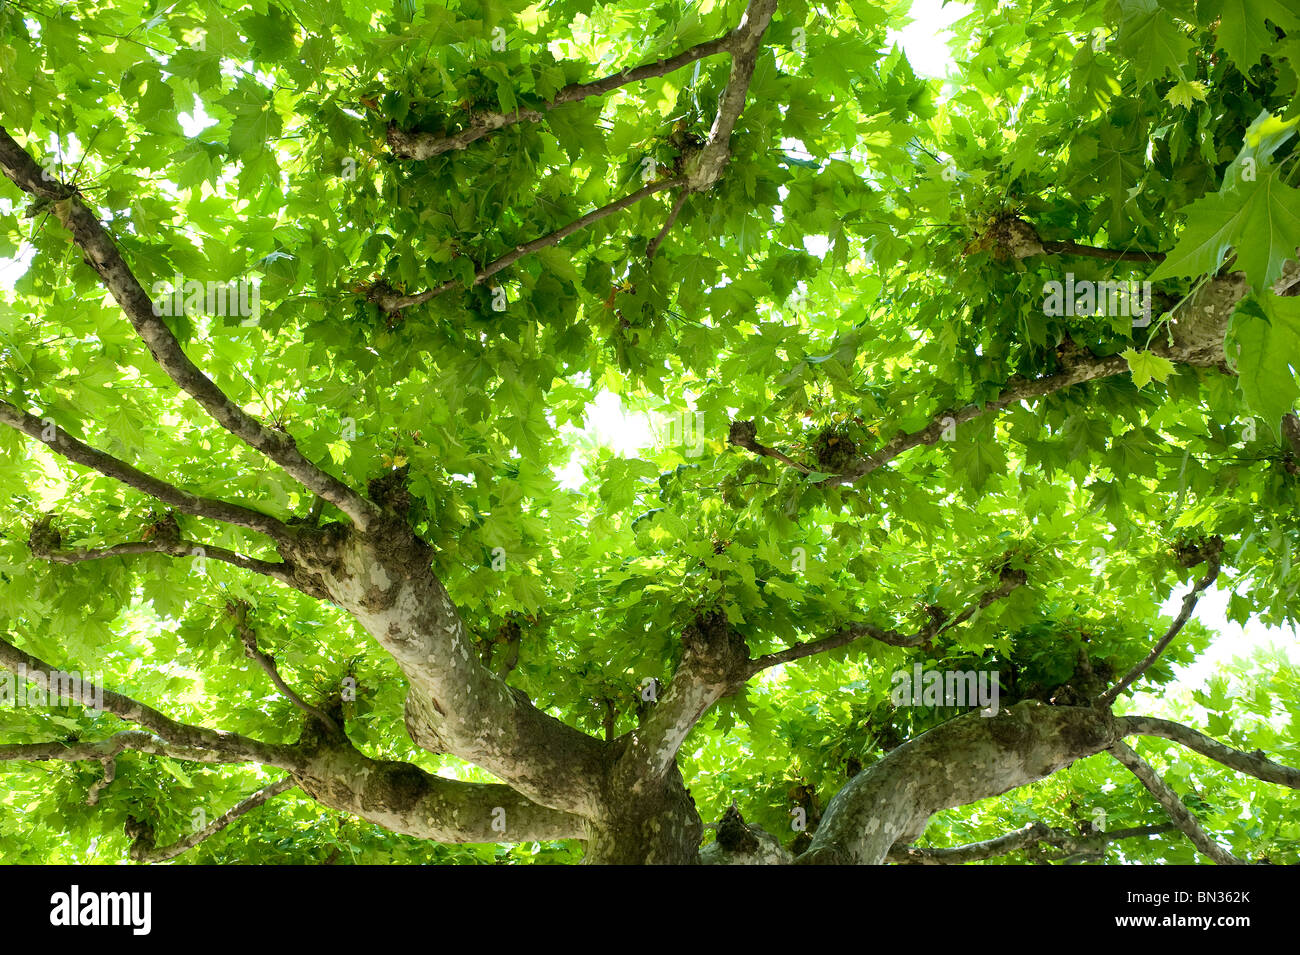 plane tree canopy of green leaves Stock Photo